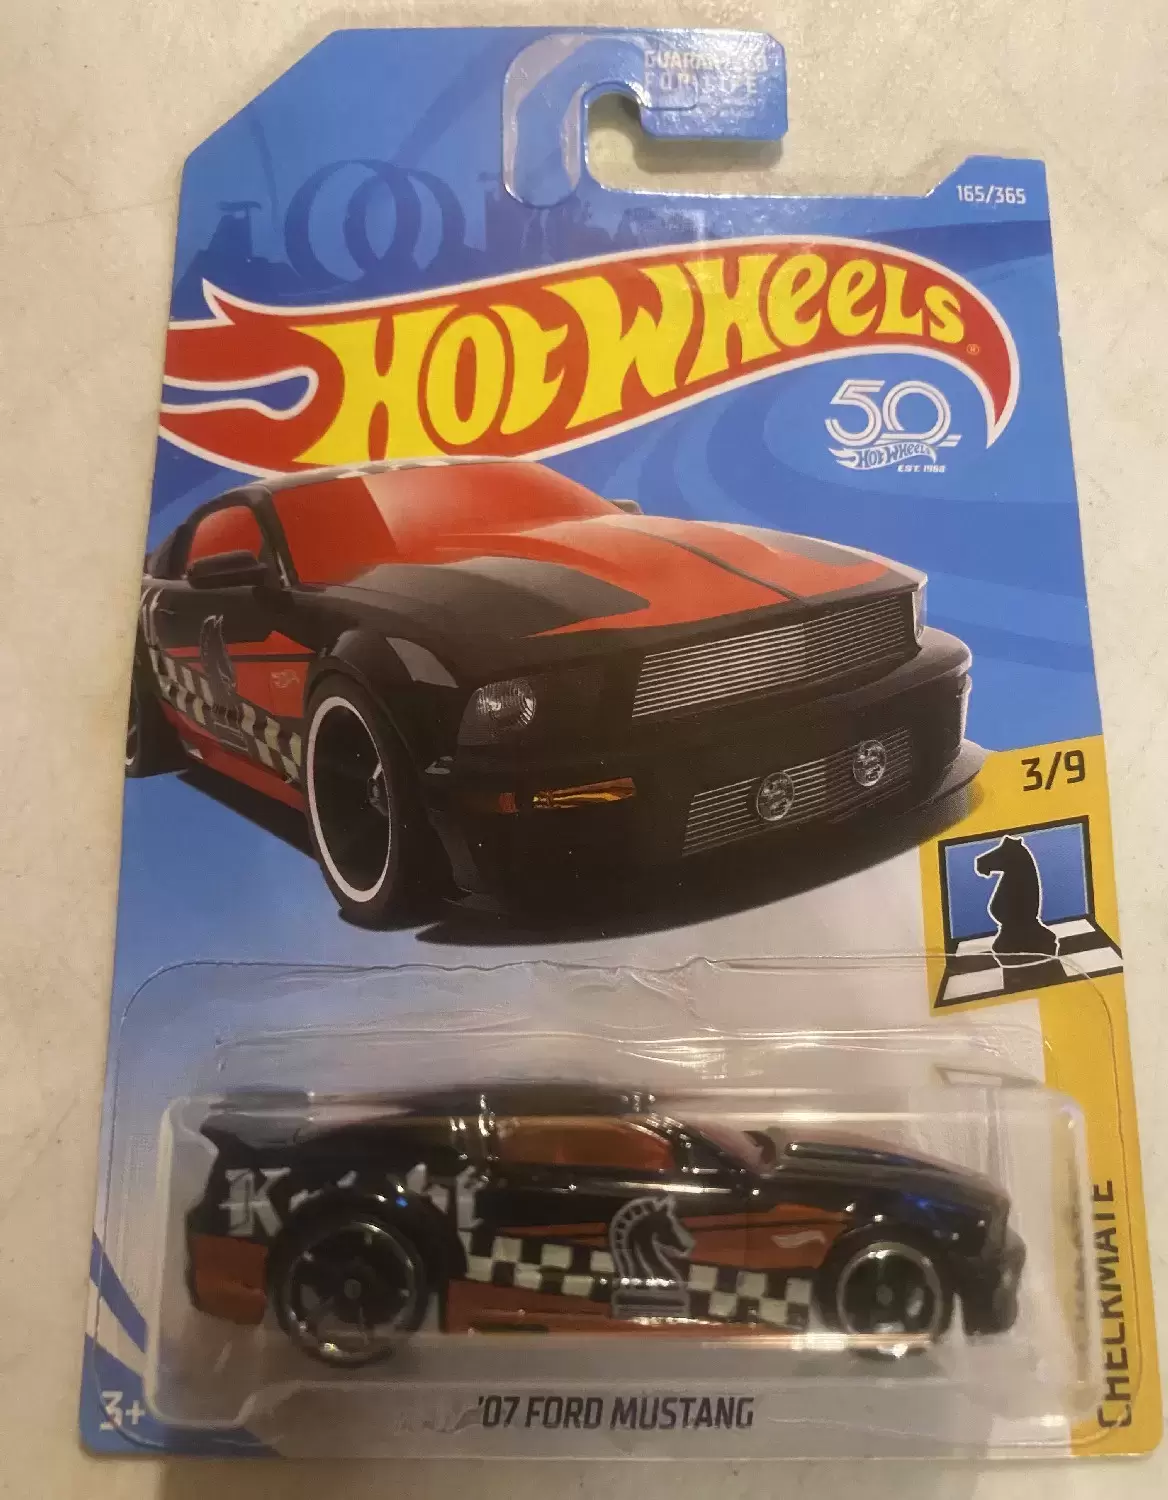 Mainline Hot Wheels - Hot Wheels ‘07 Ford Mustang (165/365) - Checkmate 3/9